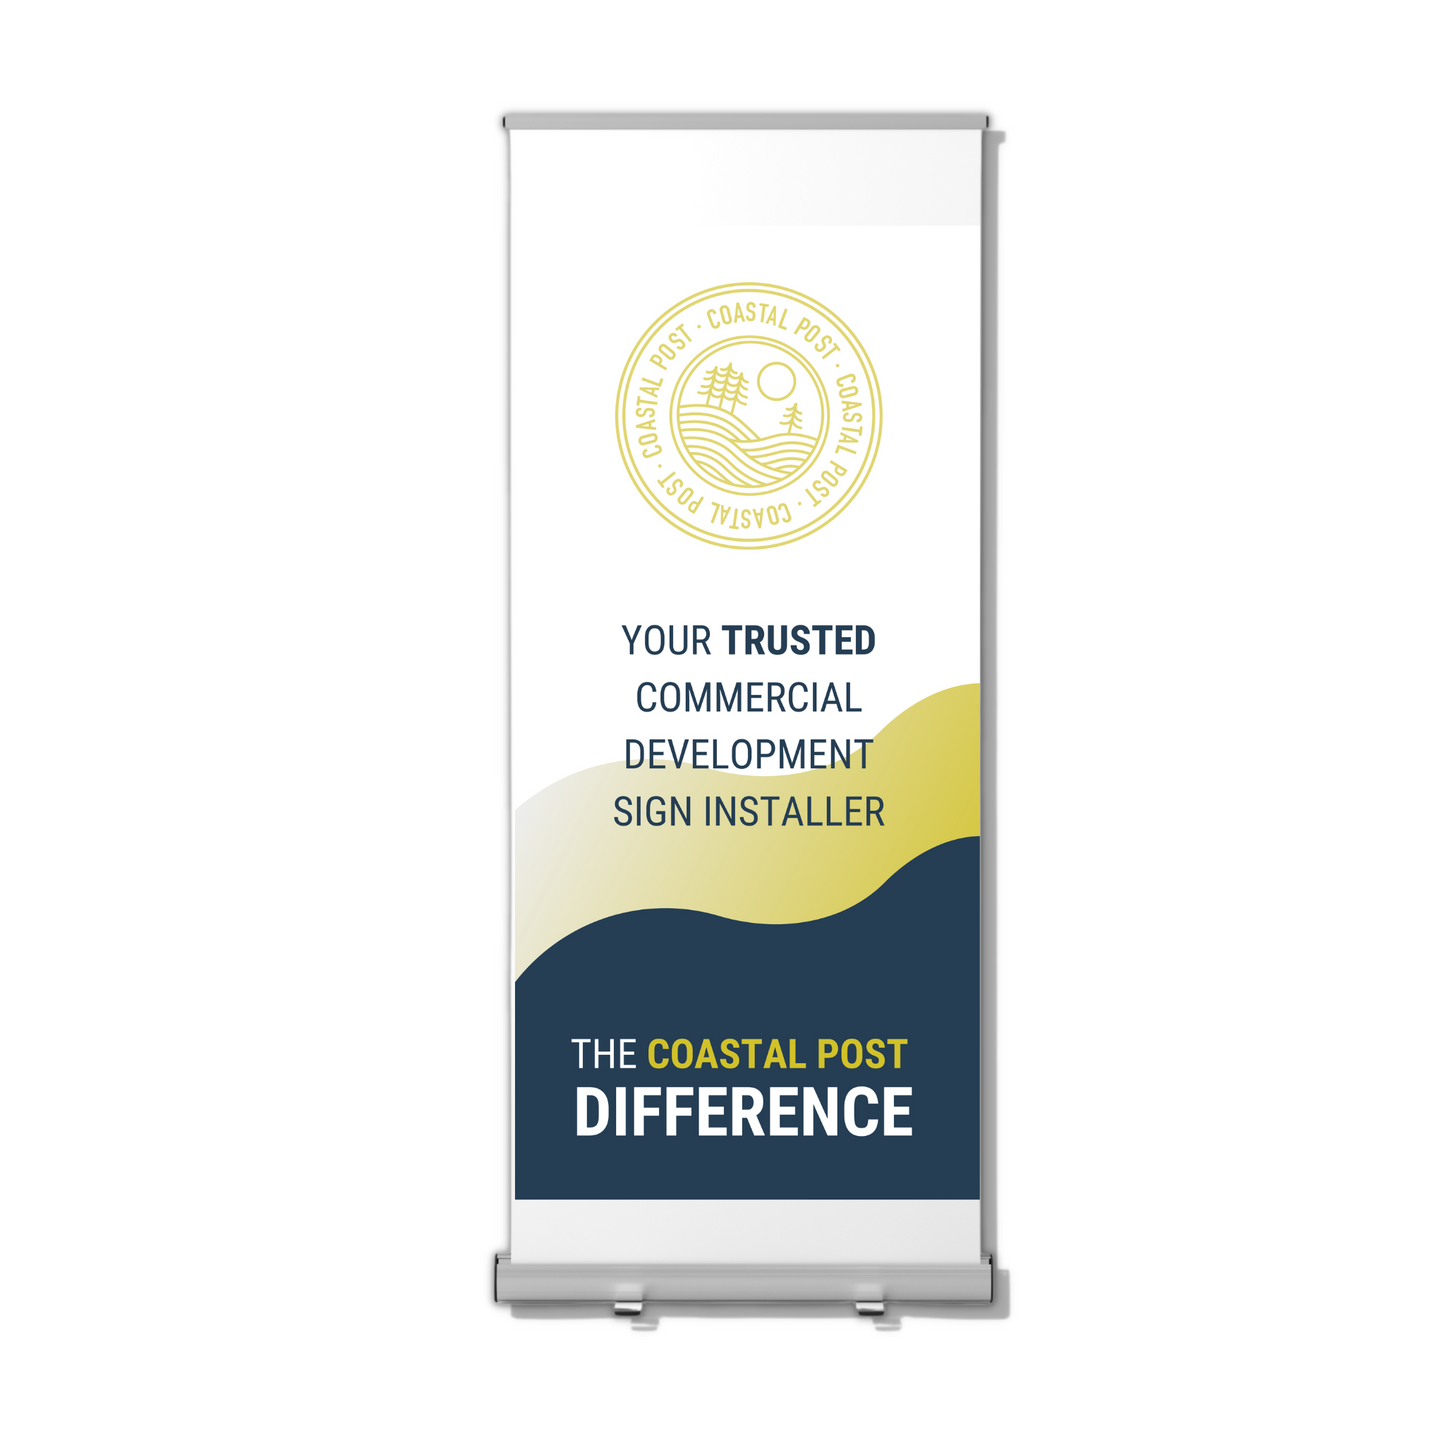 Retractable Banner 33"x77" Print and Stand - Surrey Print Shop